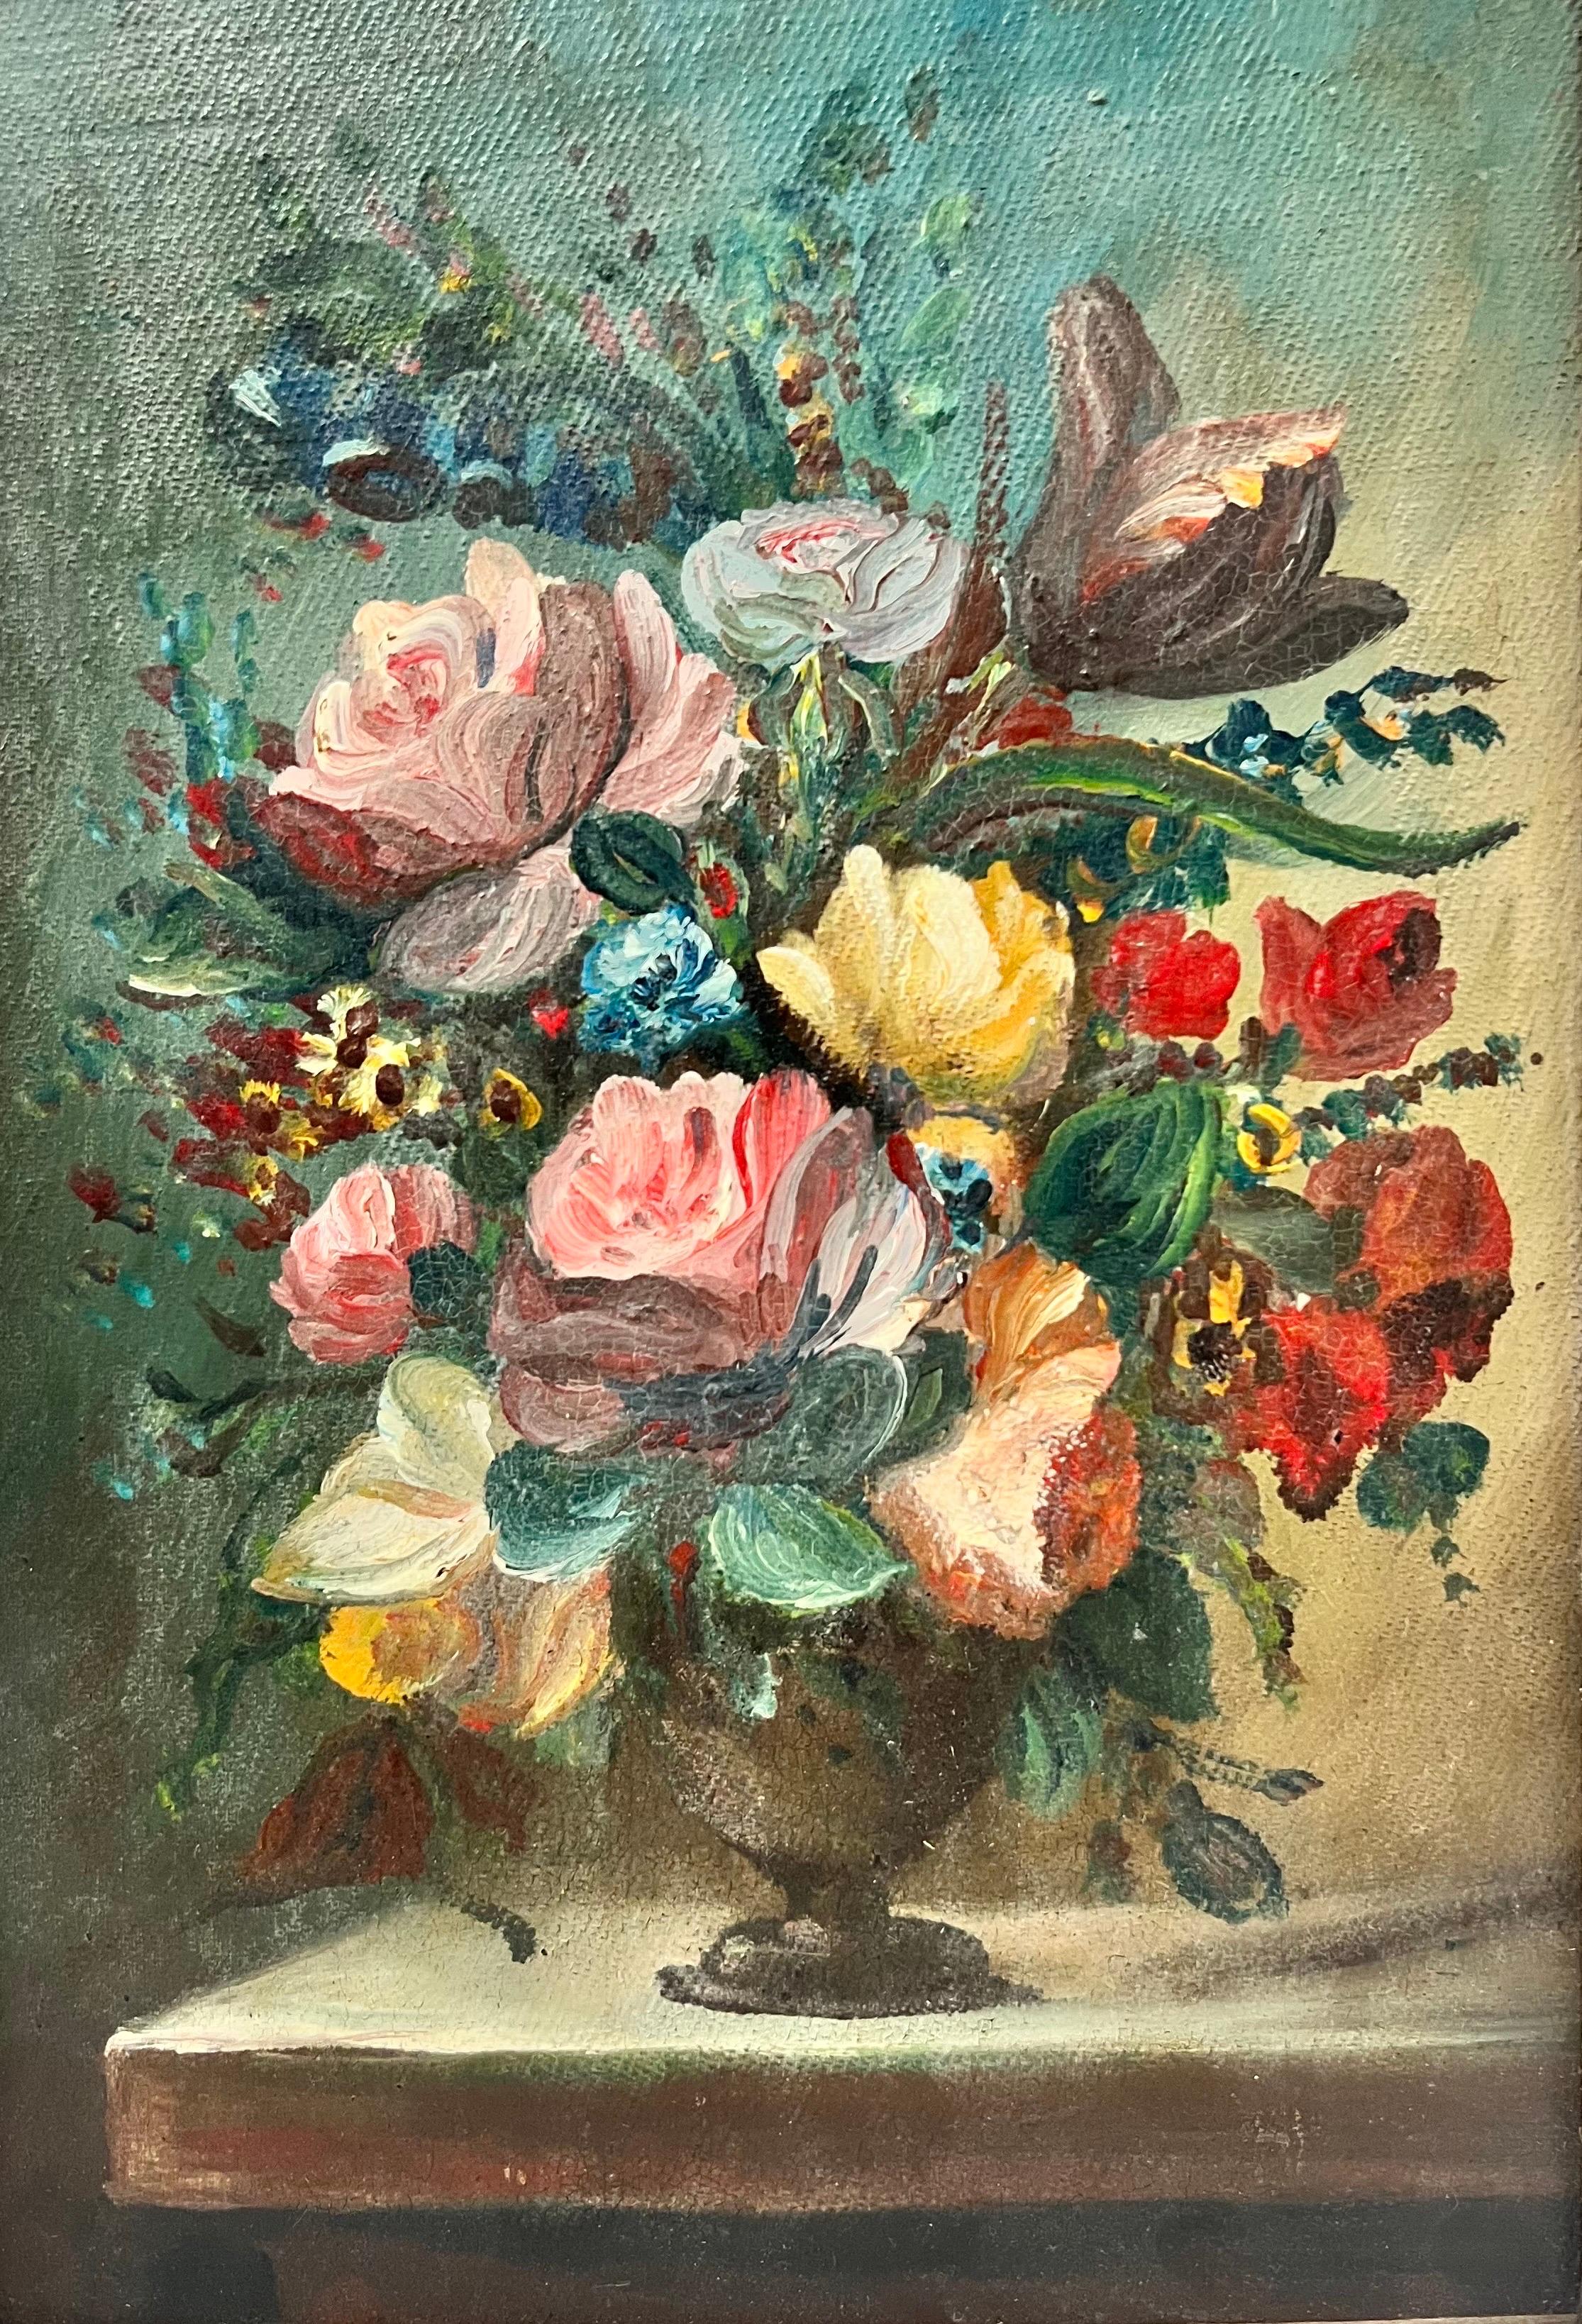 Classical Still Life of Flowers
French School, early 20th century
oil on board, framed
framed: 12 x 8.5 inches
board: 11 x 8.5 inches
provenance: private collection, France
condition: good and sound condition  